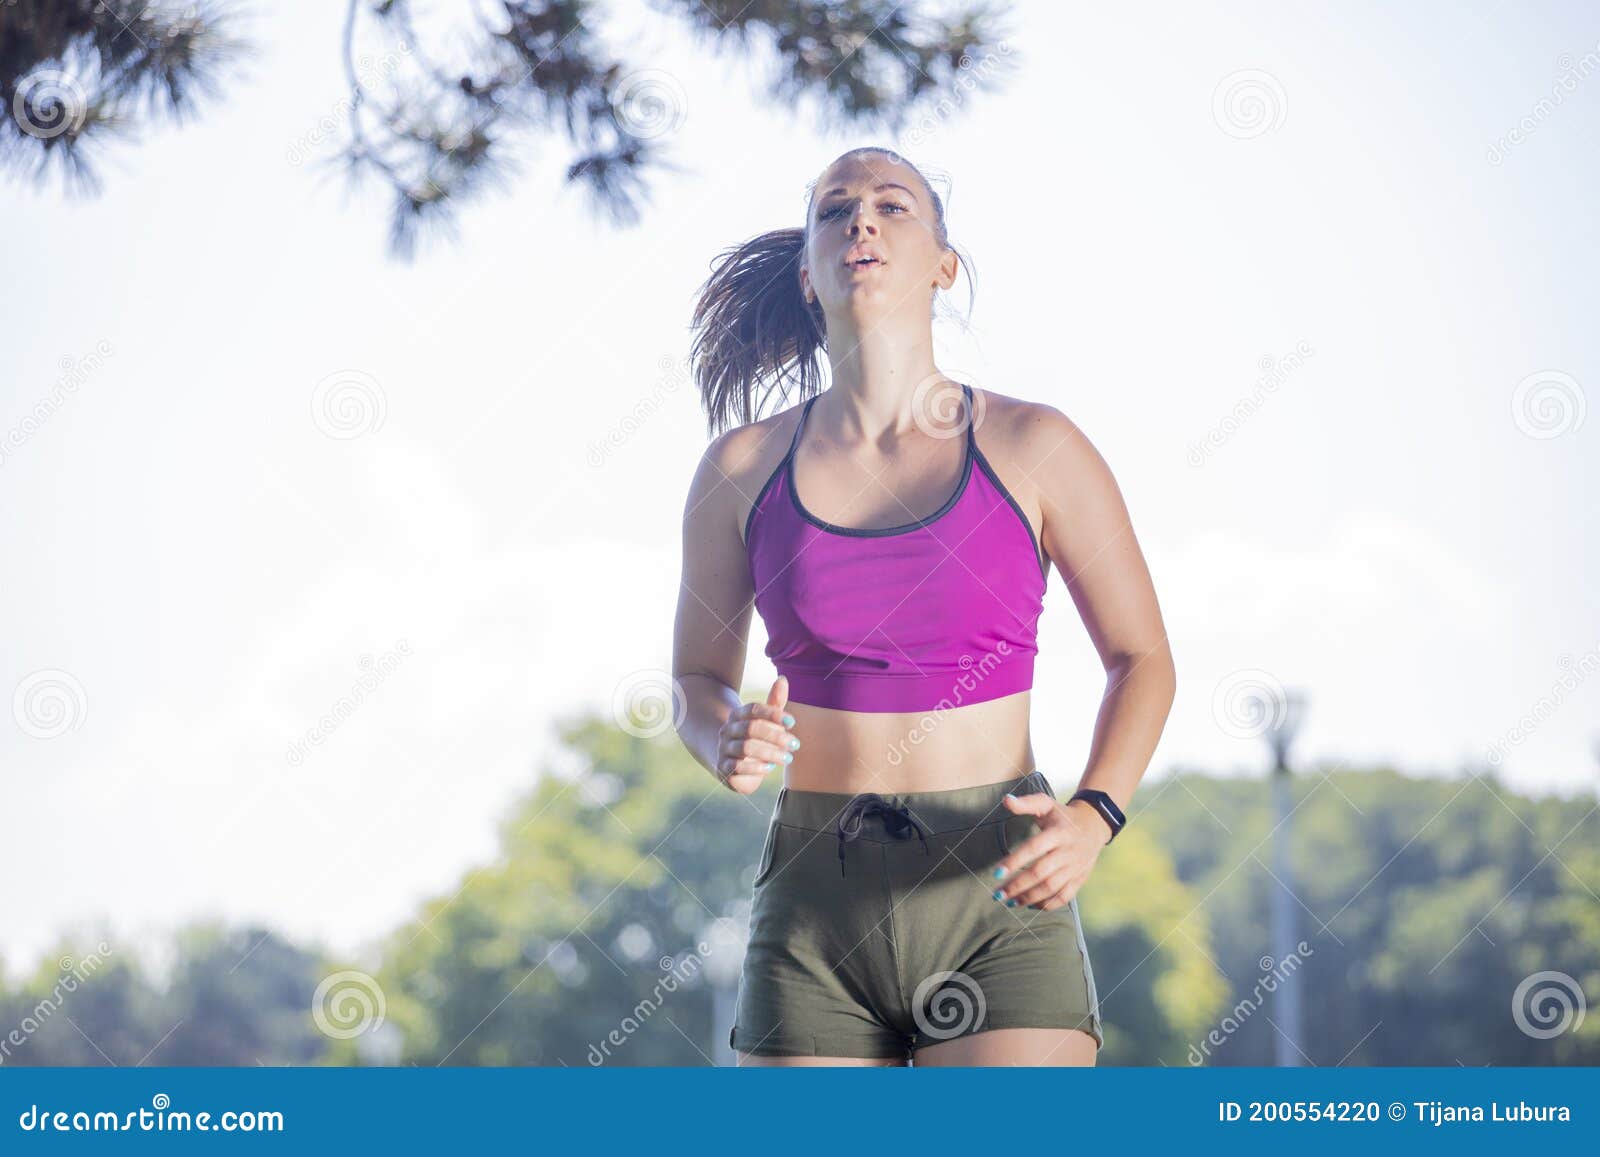 Woman Runner Running in Park Stock Photo - Image of amazing, people ...